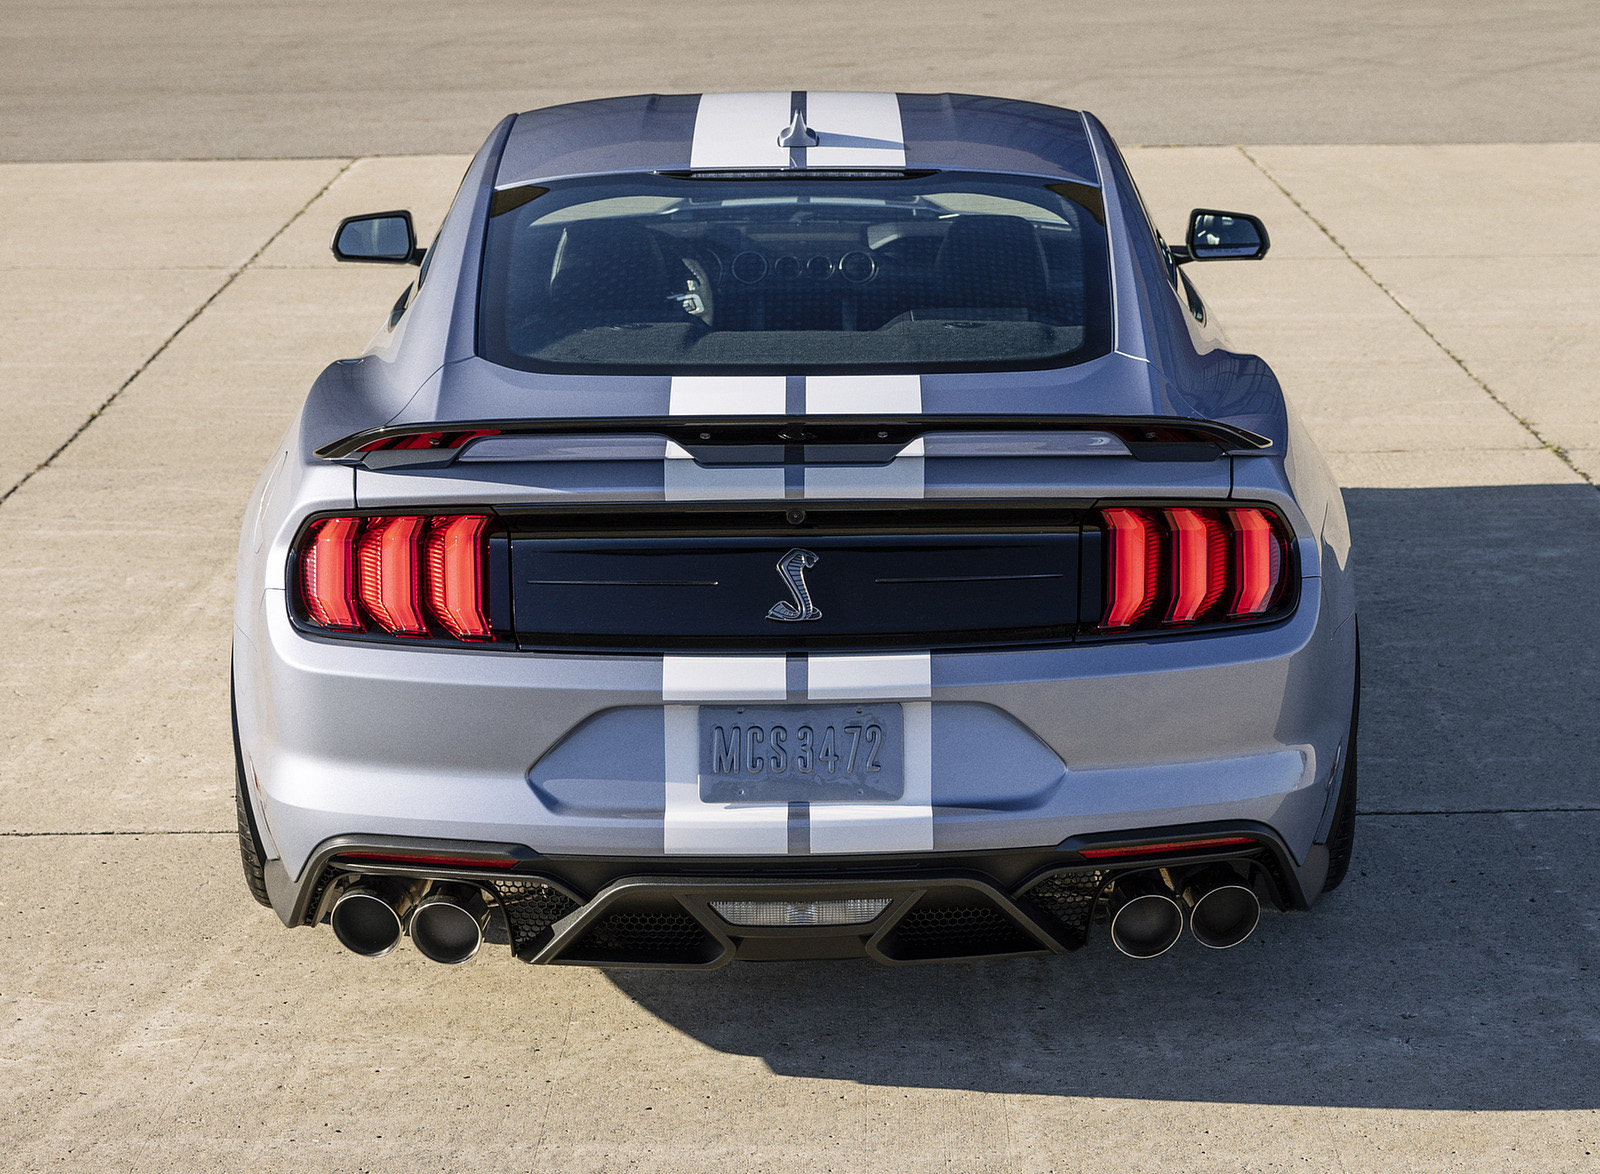 2022 Ford Mustang Shelby GT500 Heritage Edition Rear Wallpapers #12 of 27